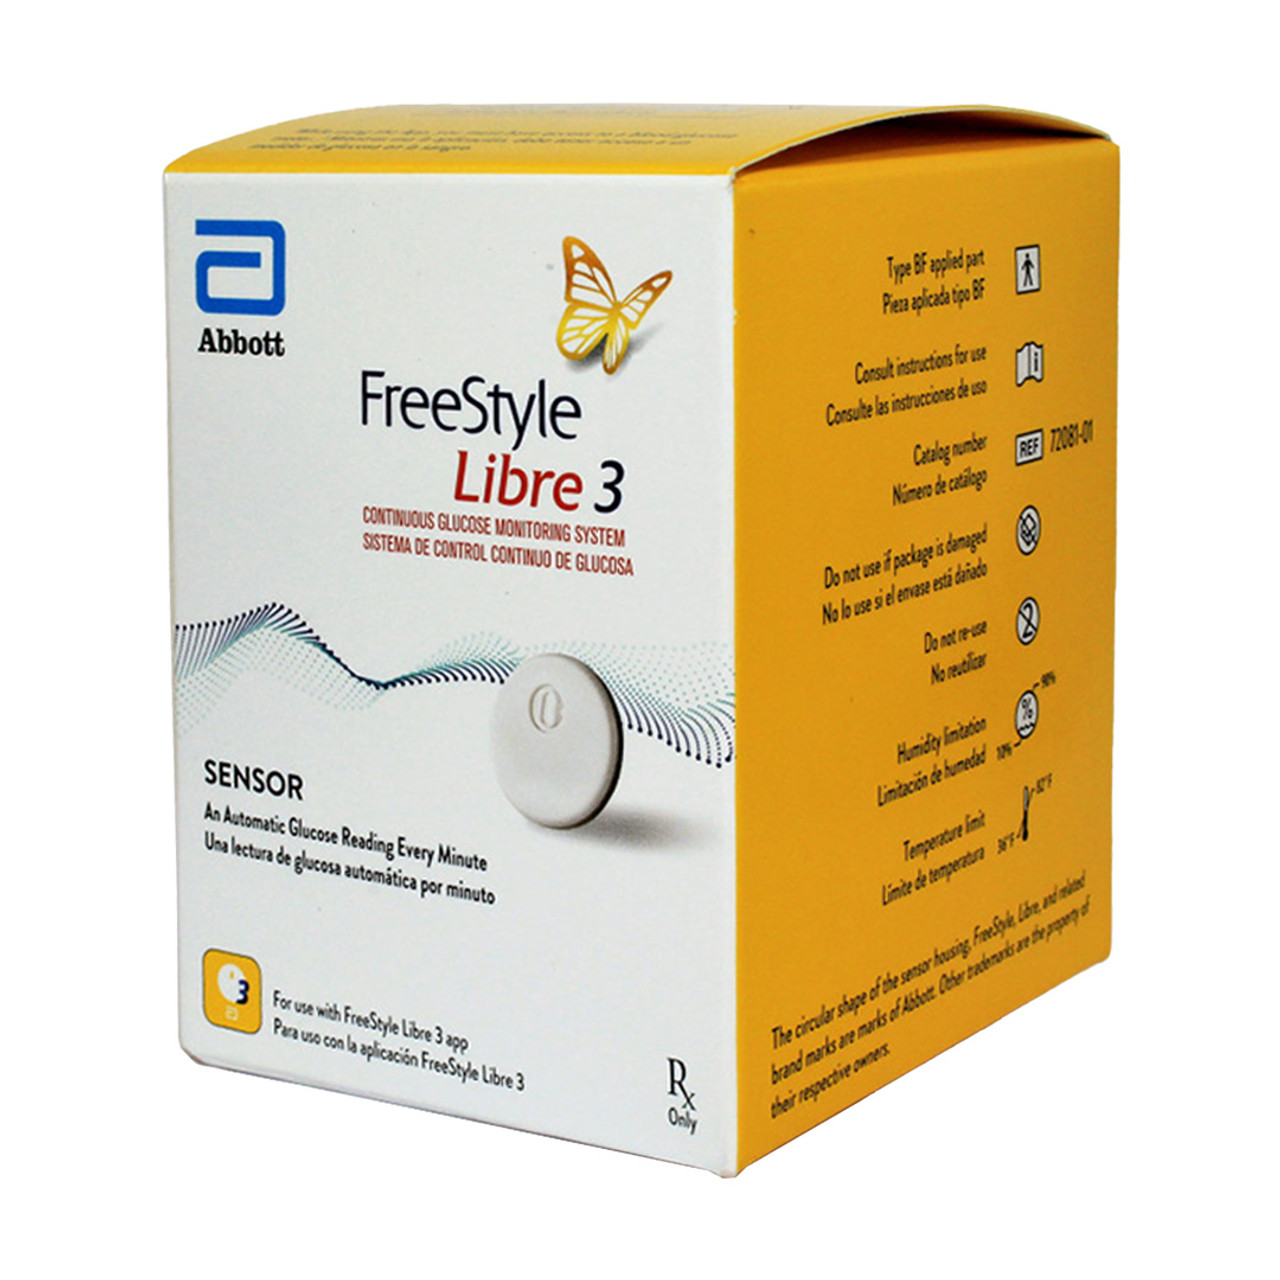 U.S. FDA Clears Abbott's FreeStyle Libre® 2 and FreeStyle Libre® 3 Sensors  for Integration with Automated Insulin Delivery Systems - Mar 6, 2023